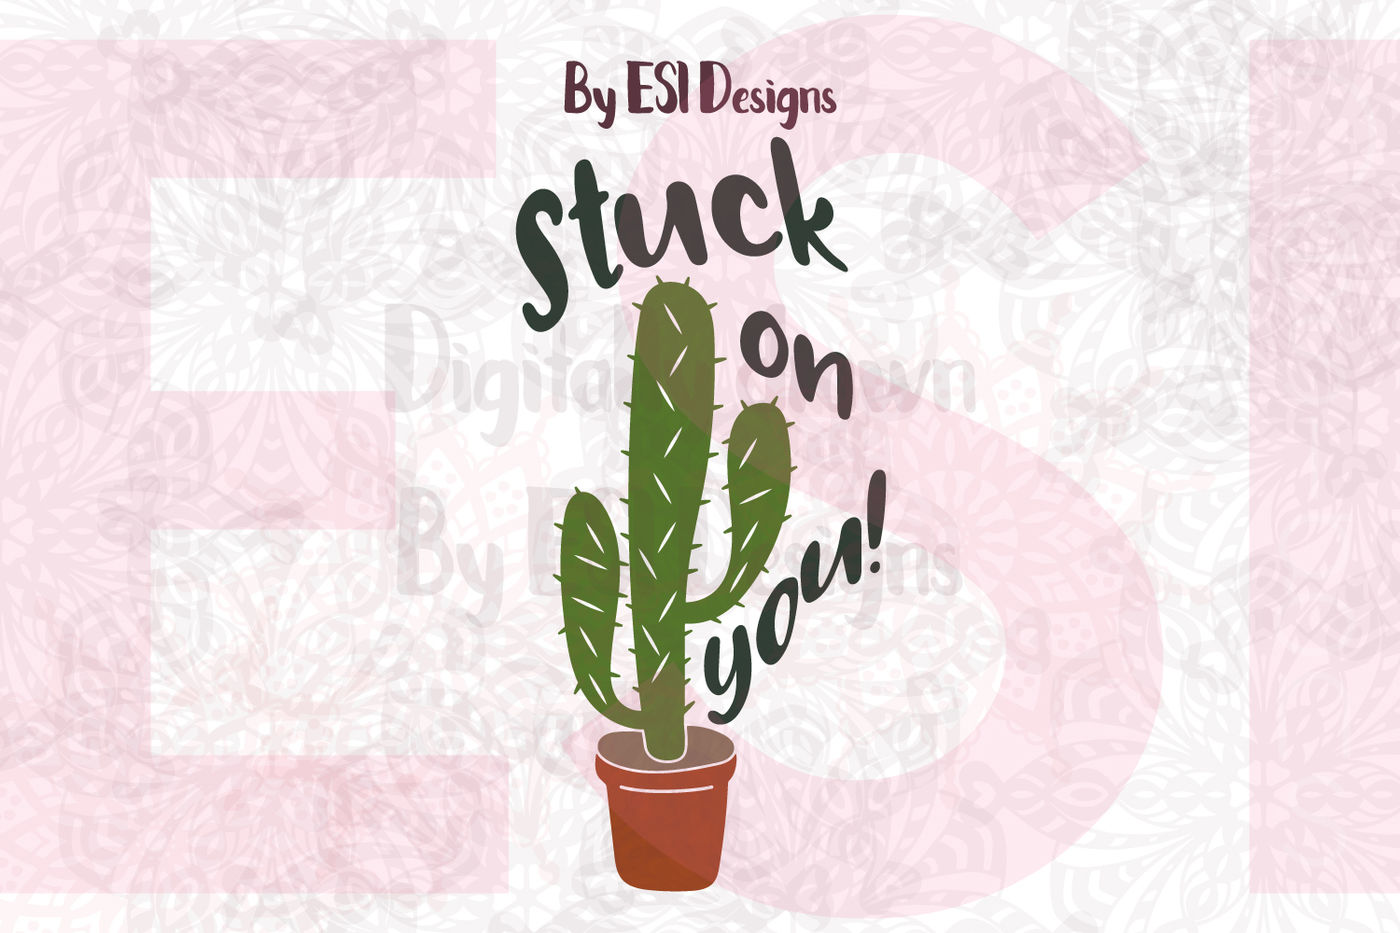 ori 77929 644c582b8d327a3a8602cdb7a986d2d9aef06b0a stuck on you cactus design and quote svg dxf eps and png cutting files clipart and printables